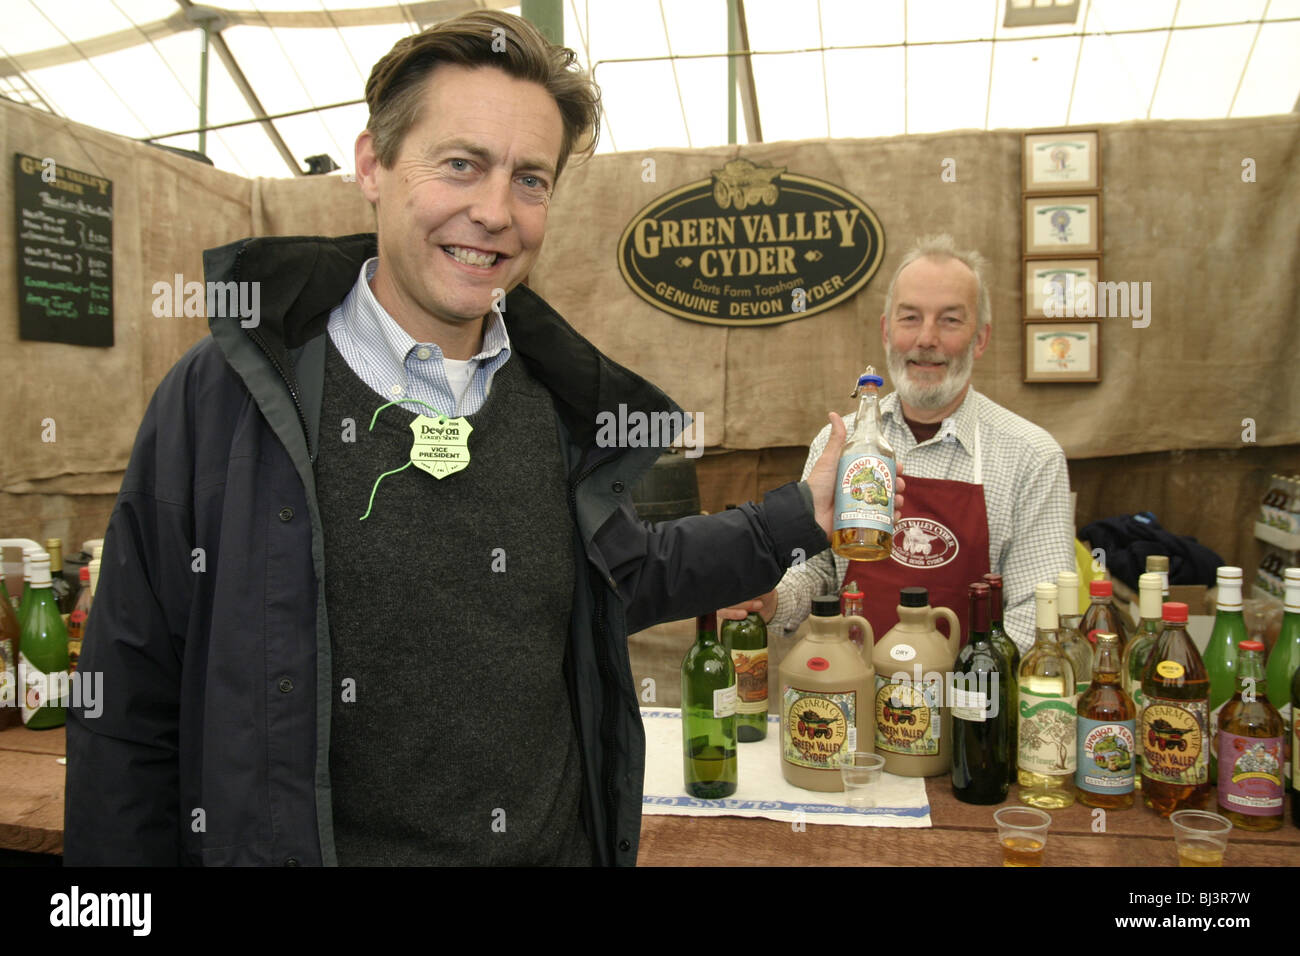 Ben Bradshaw MP for Exeter UK  at a cider maker's stall Devon County Show 2006 when Environment Minister holding bottle Stock Photo